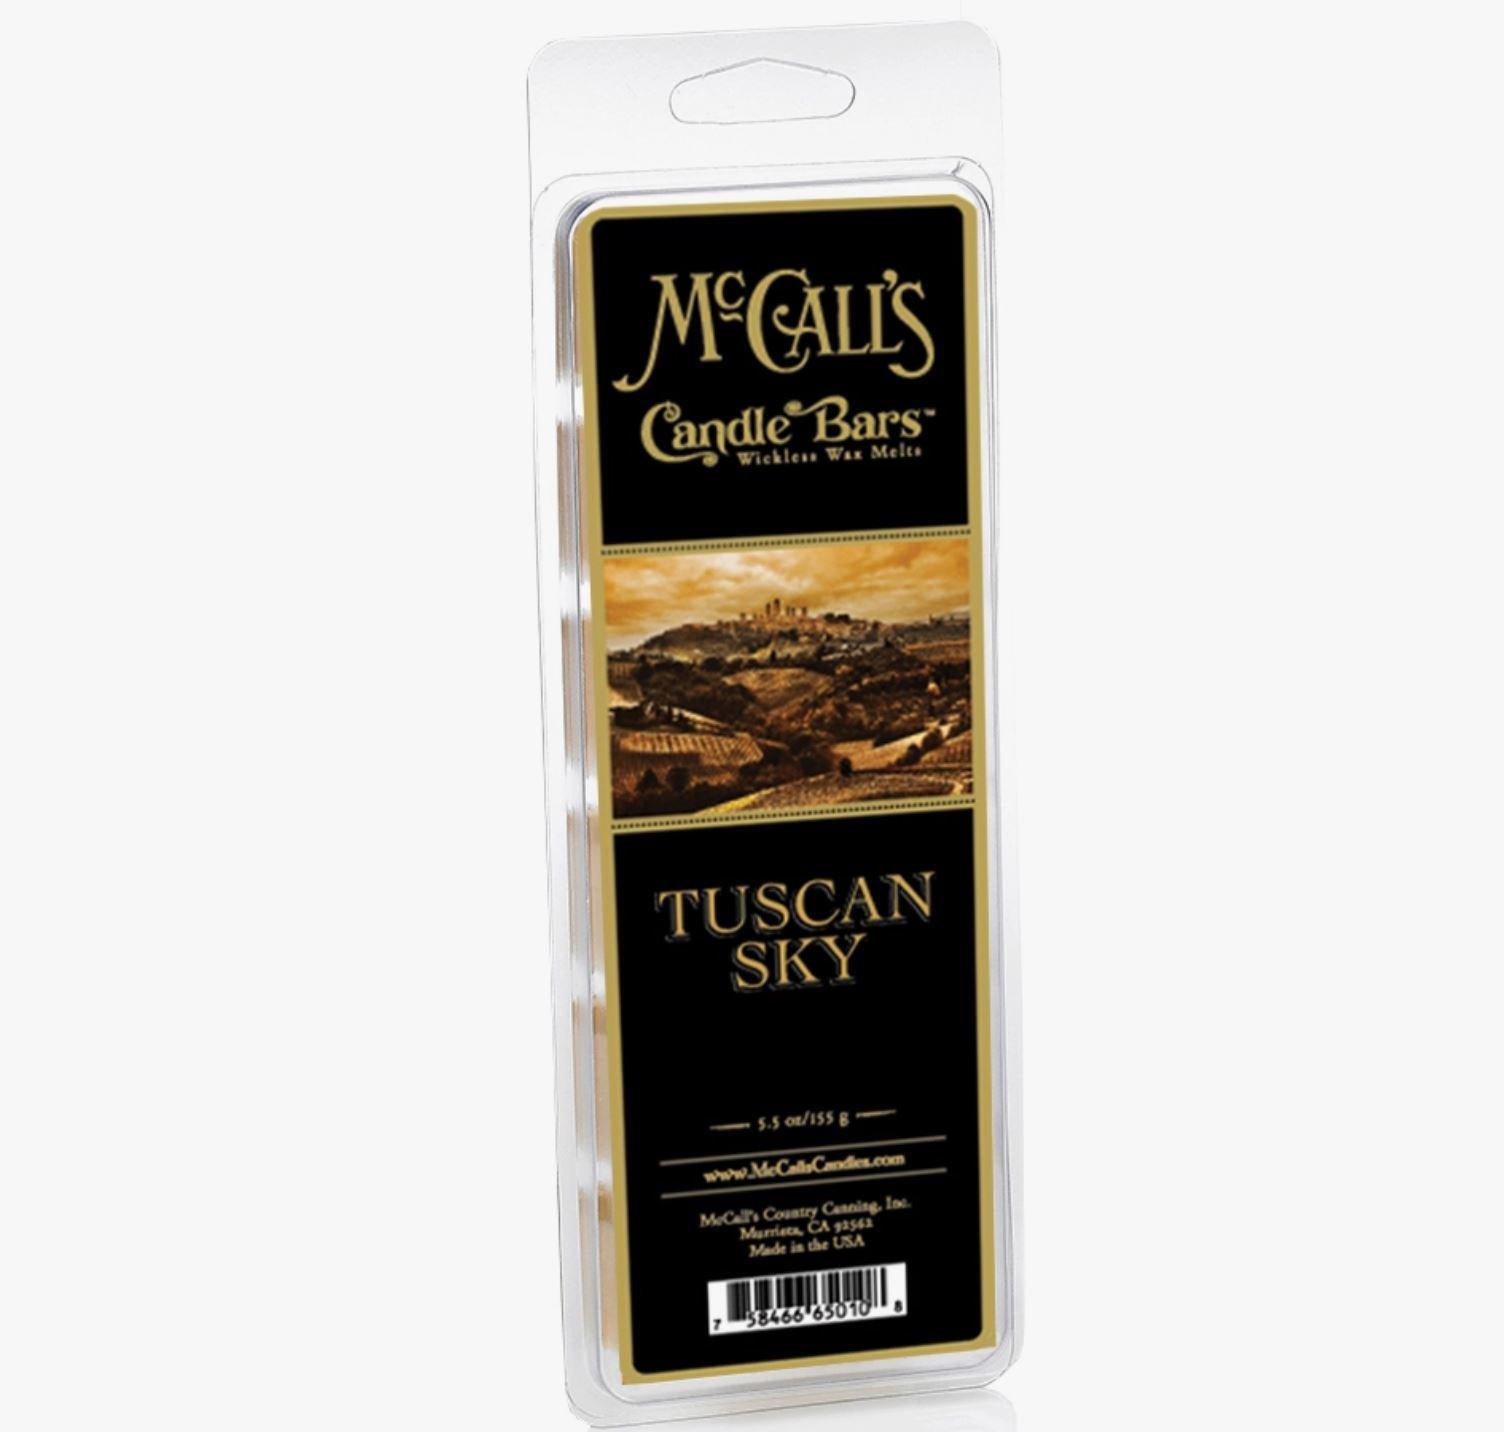 McCall's Candle Bars Wax Melts | Tuscan Sky